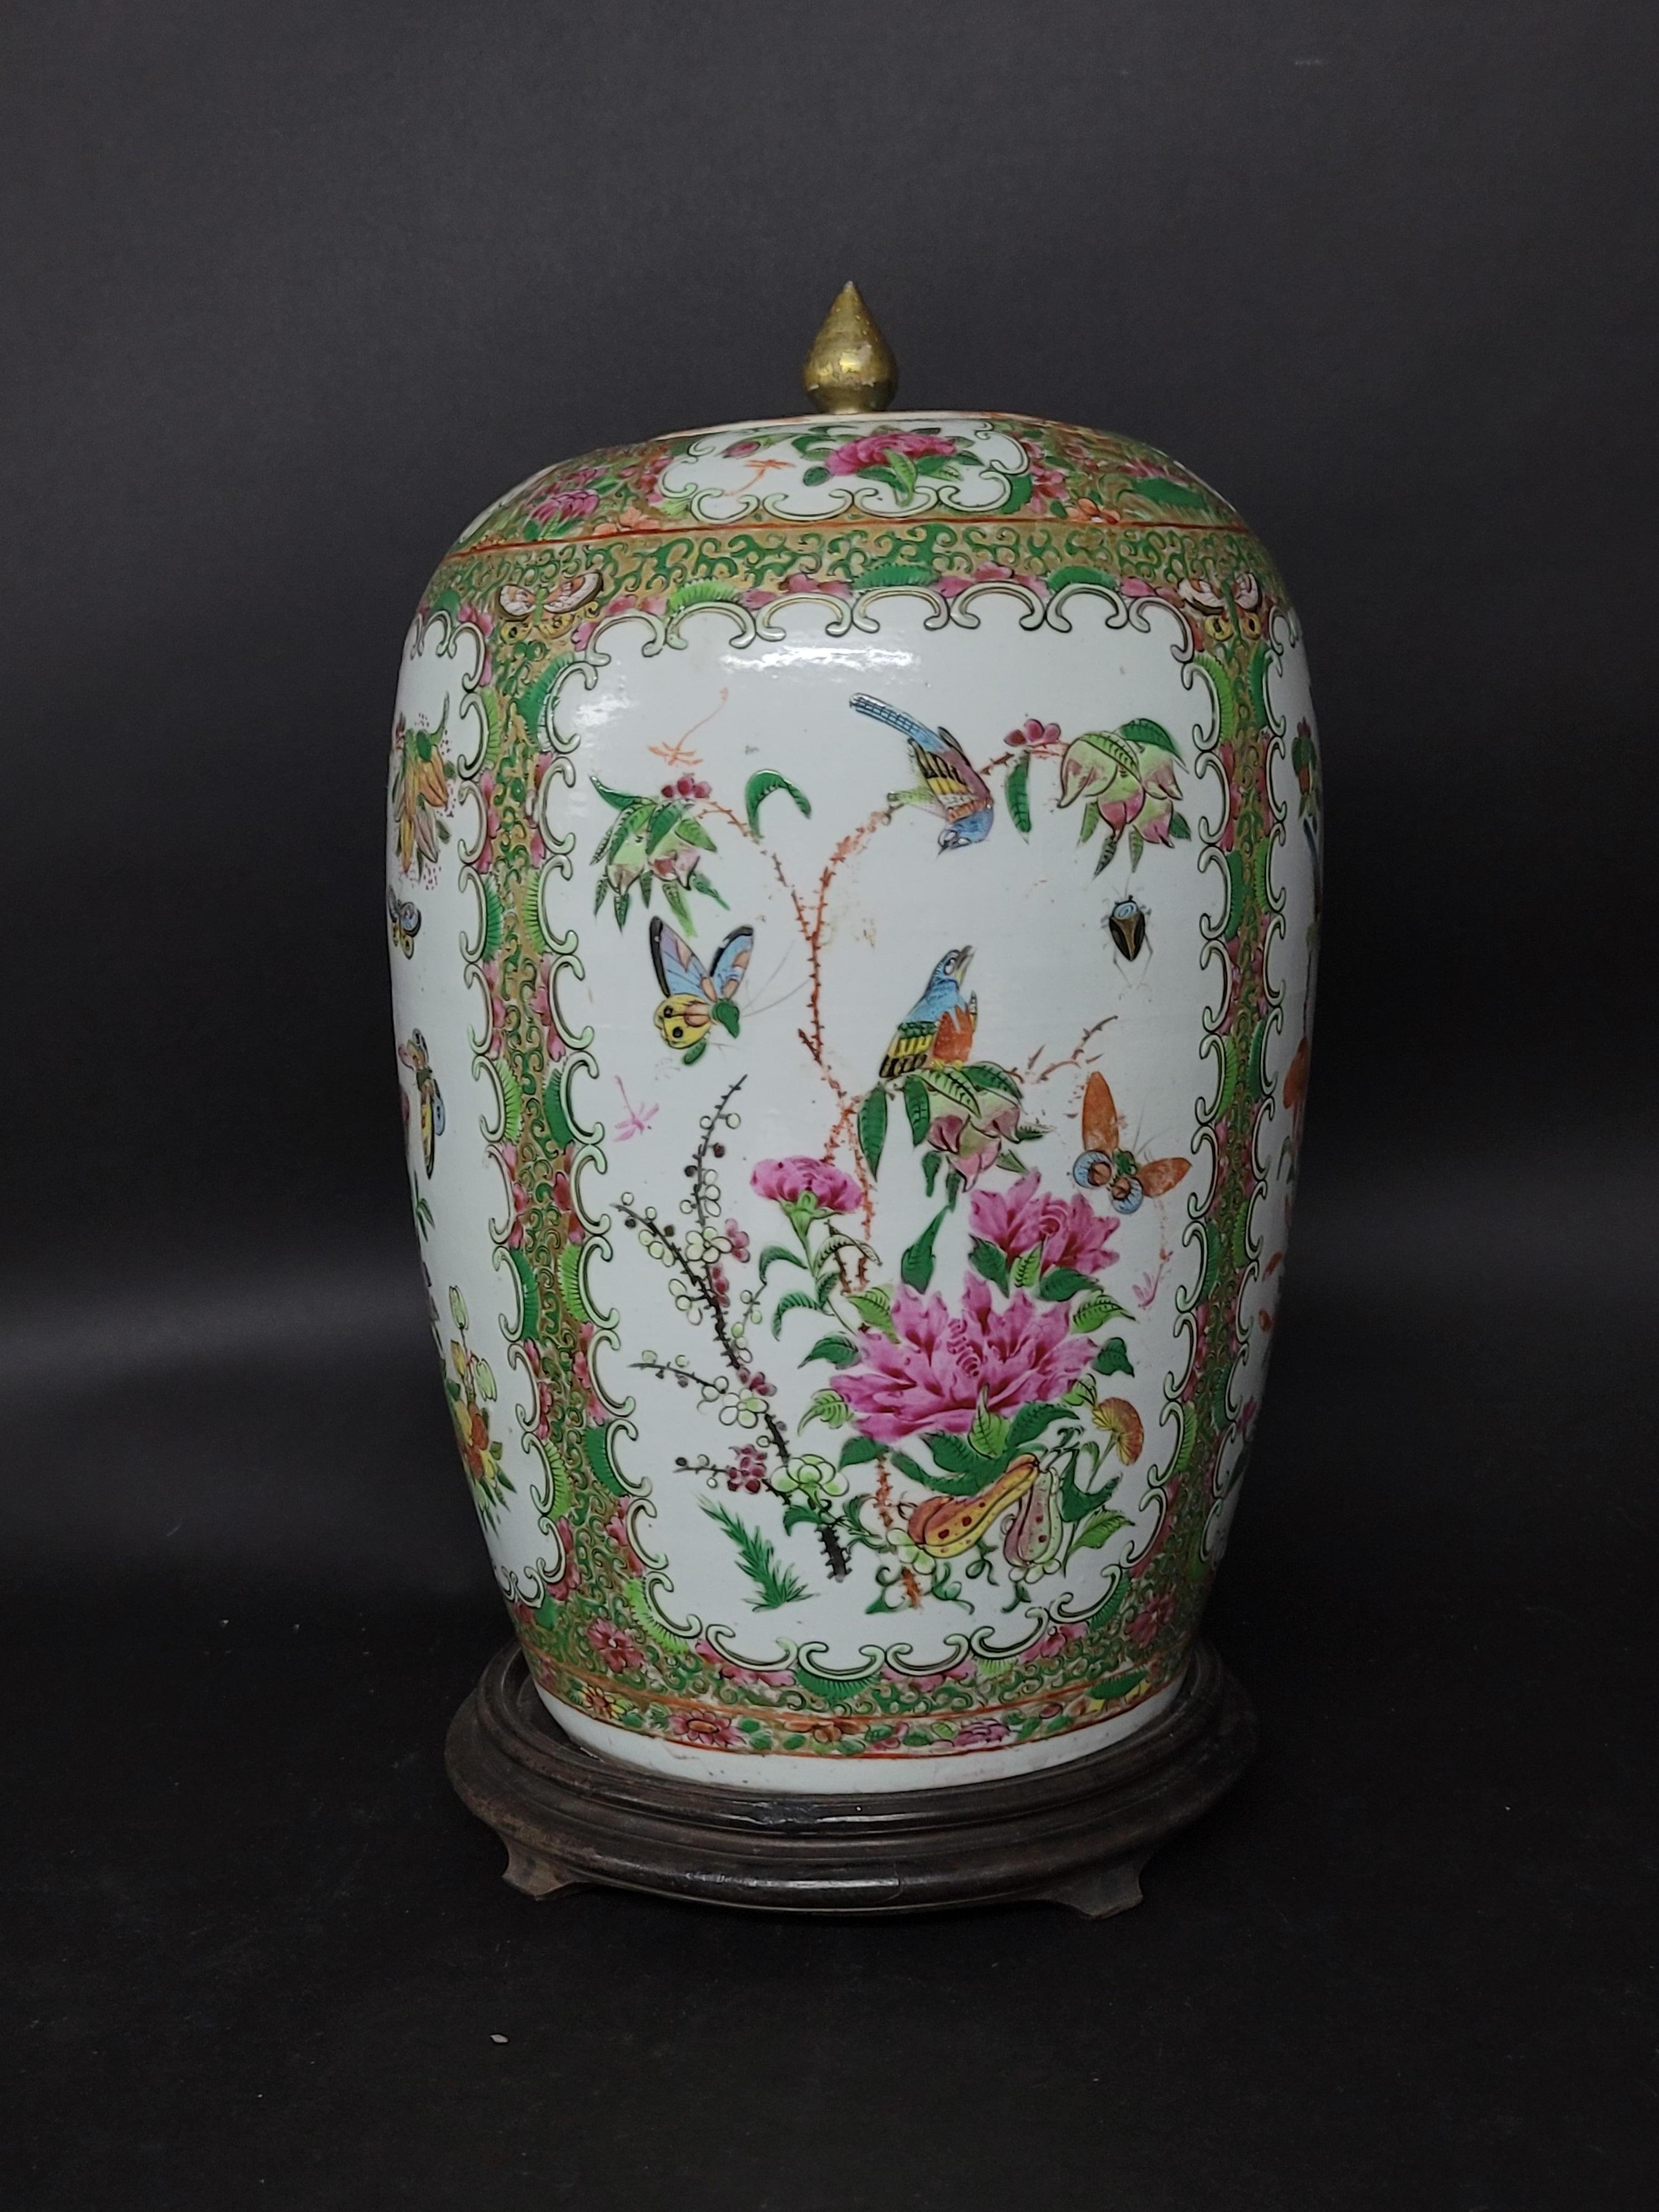 A large Chinese Export rose famille covered jar with wood base depicting birds and flower blossom.

    